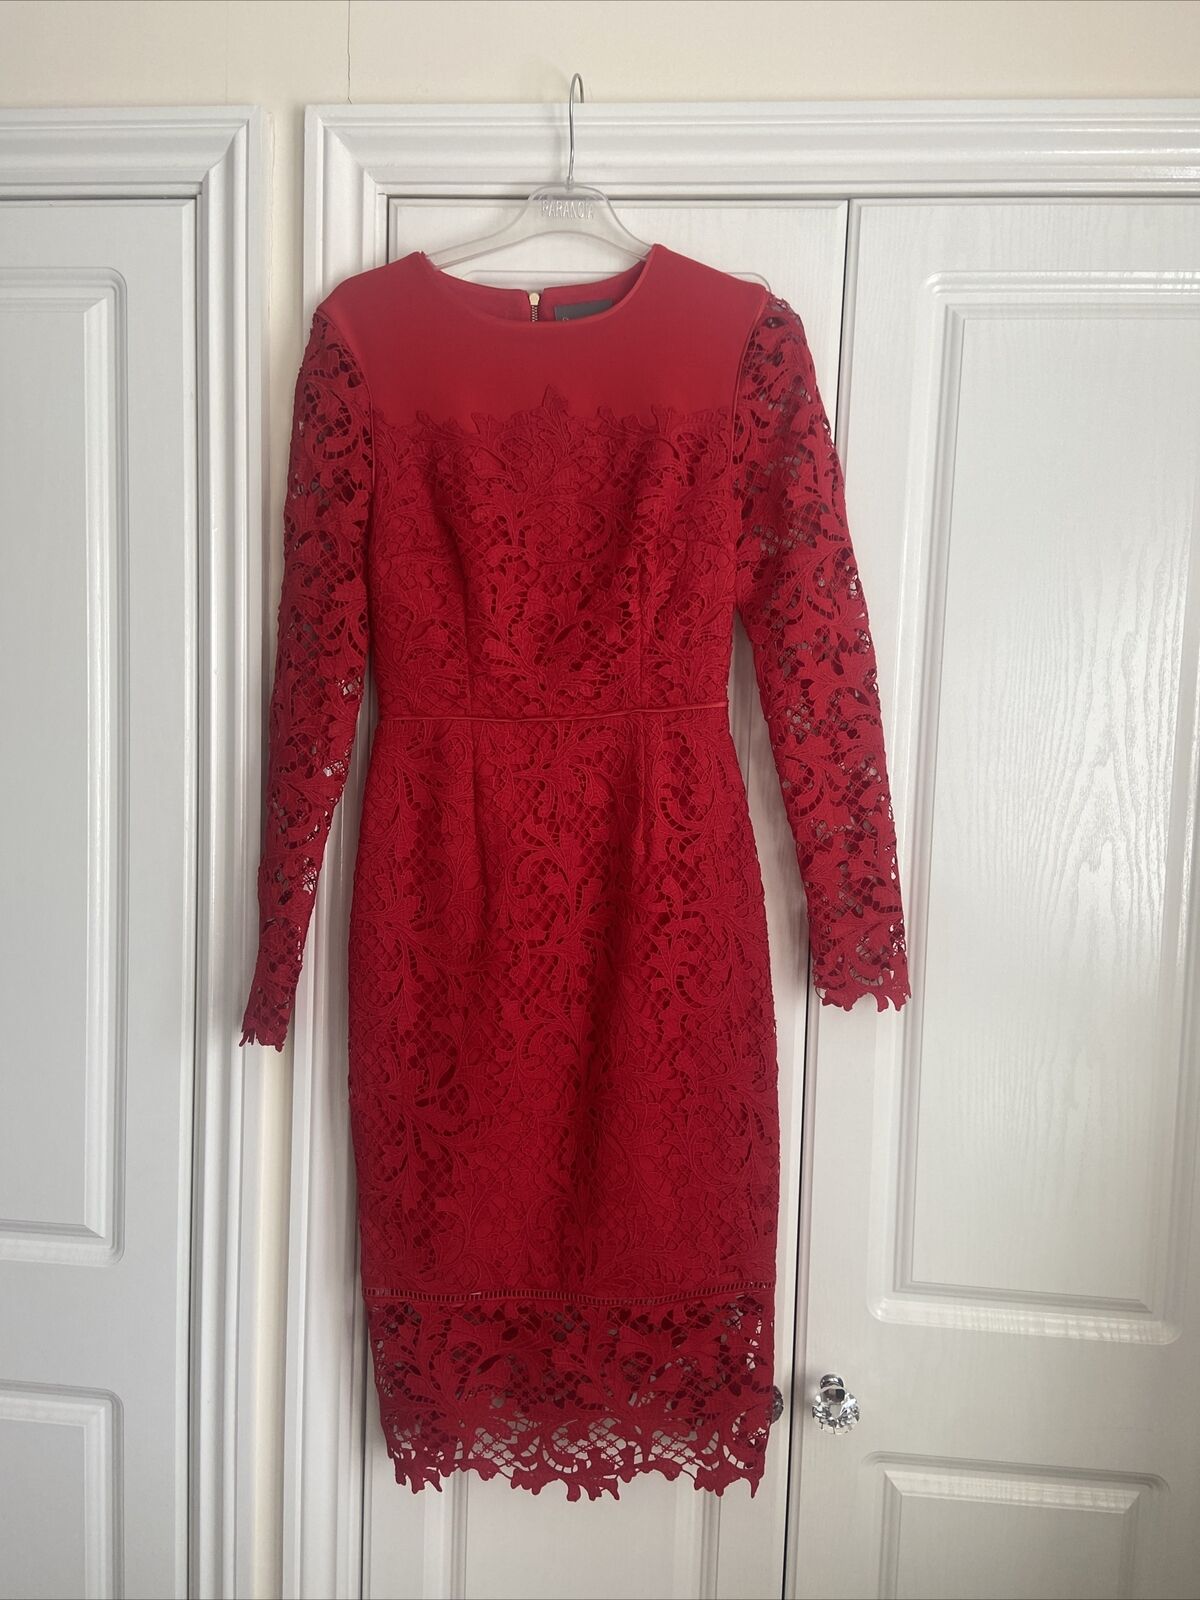 red lace fully lined phase eight dress size 8 - image 1